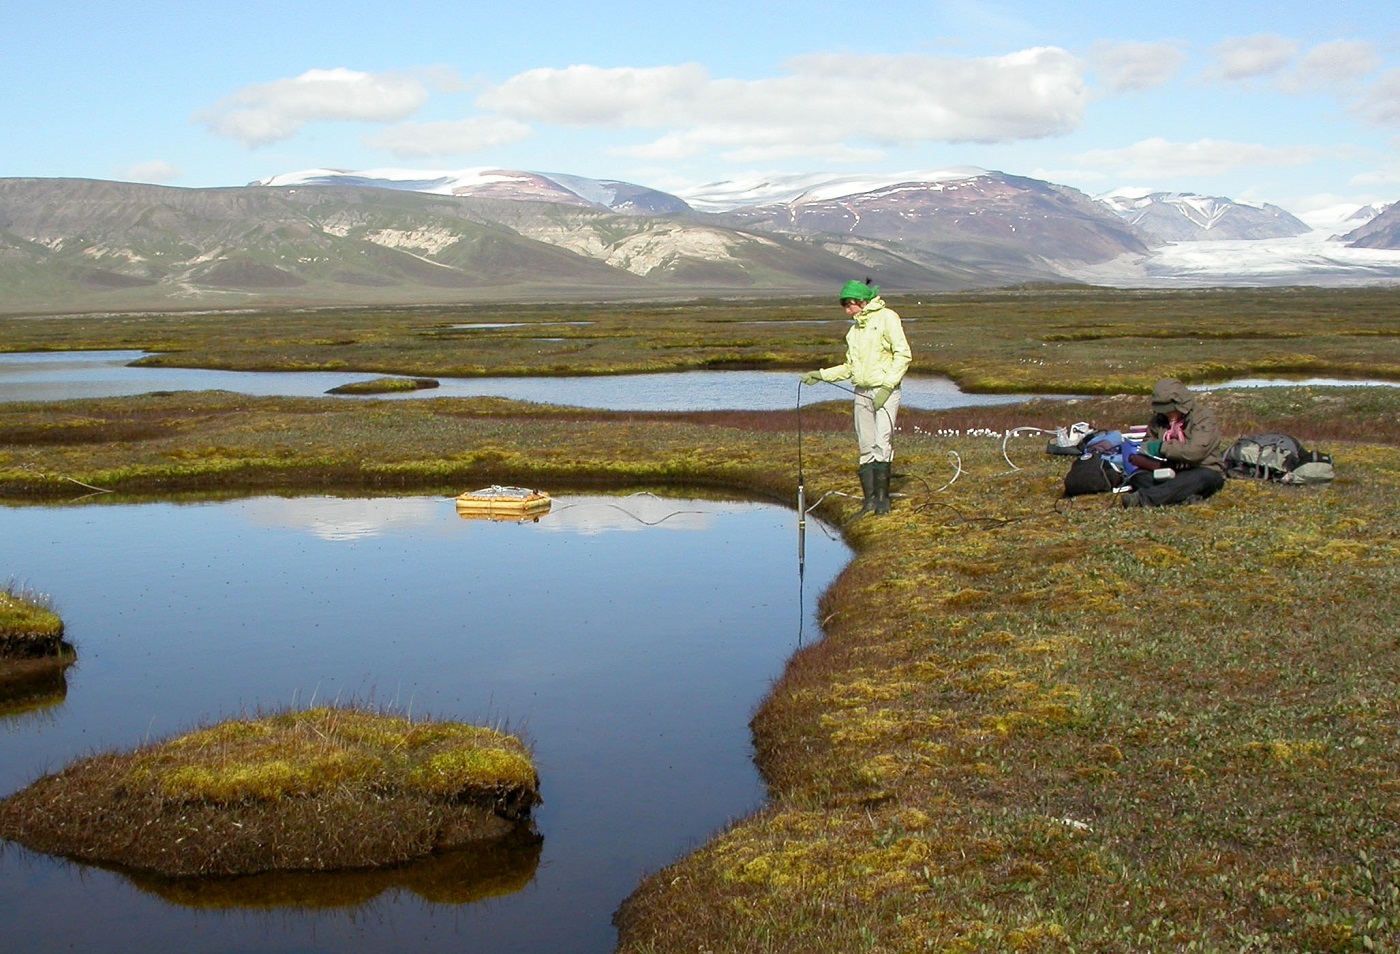 Scientists from the INRS's Centre Eau Terre Environnement are conducting a field study.